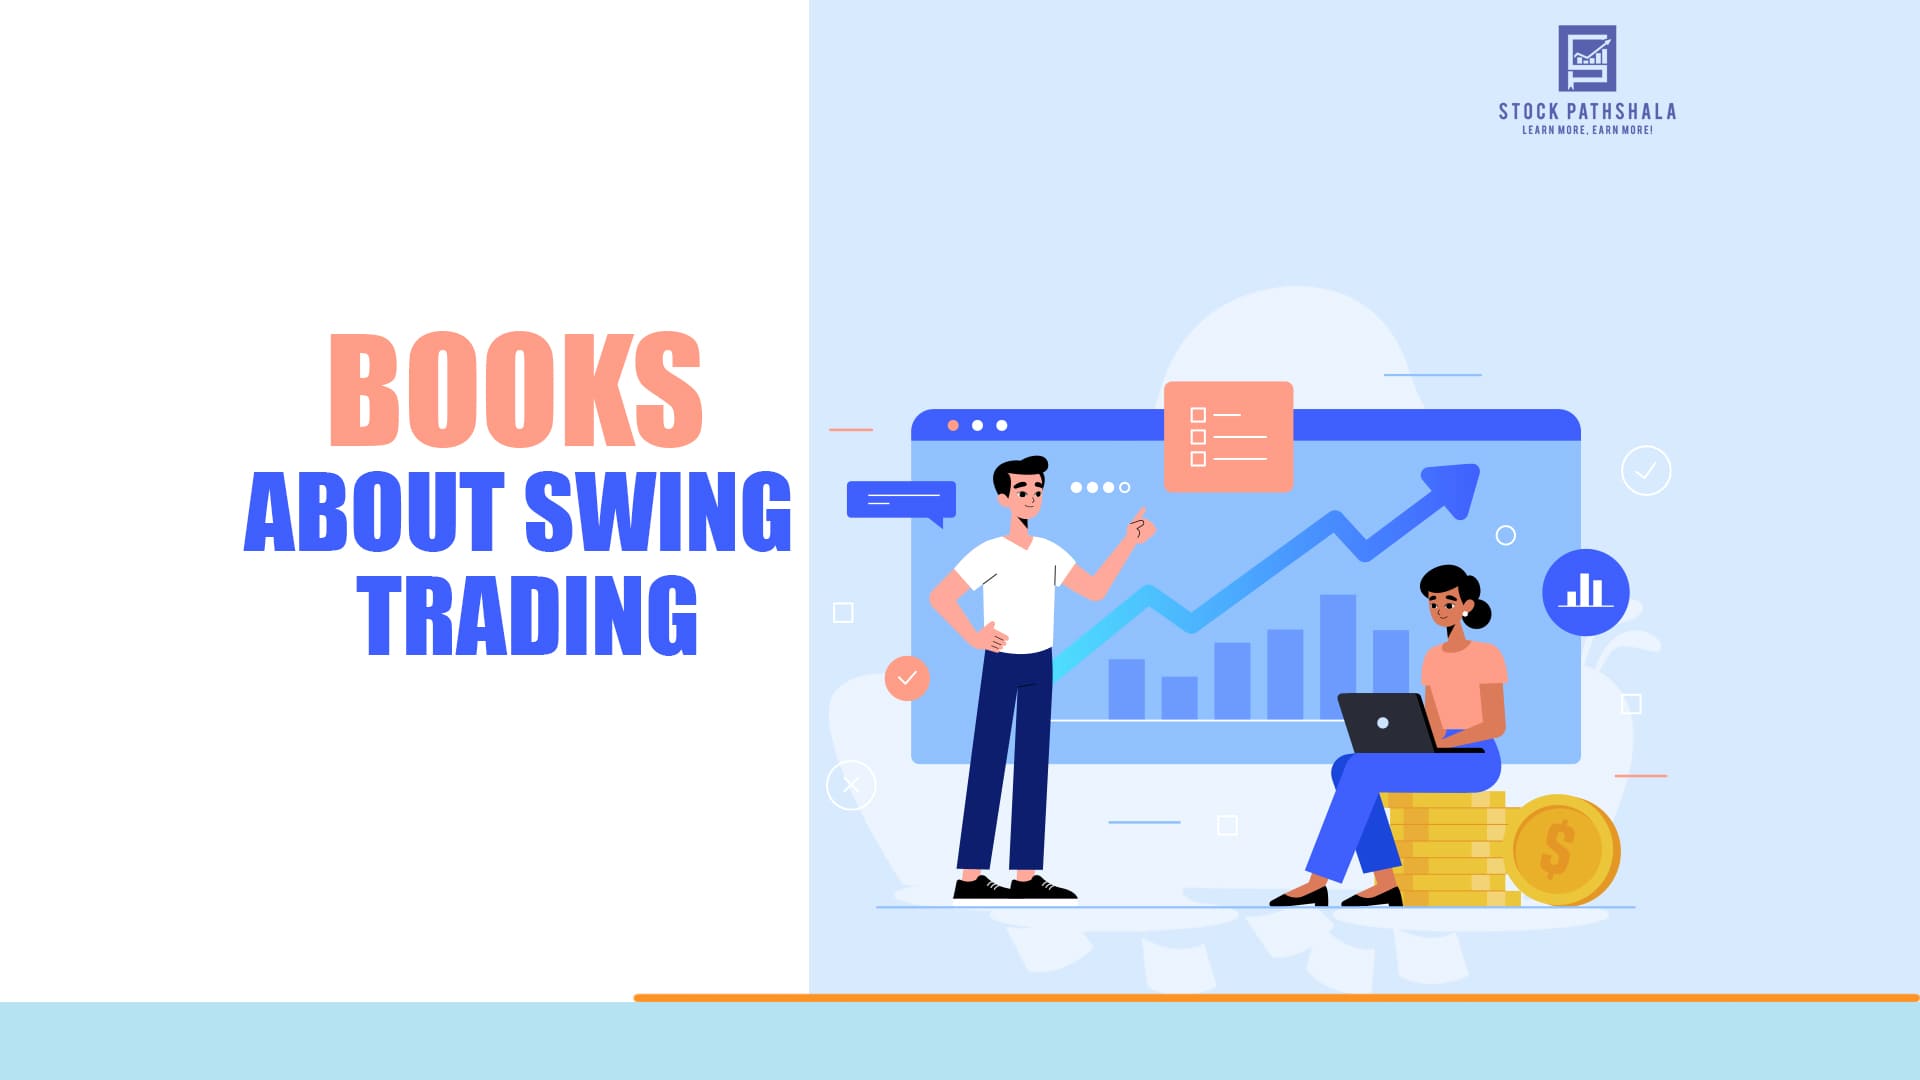 List of 9 Books About Swing Trading 2021 | Details, Strategy